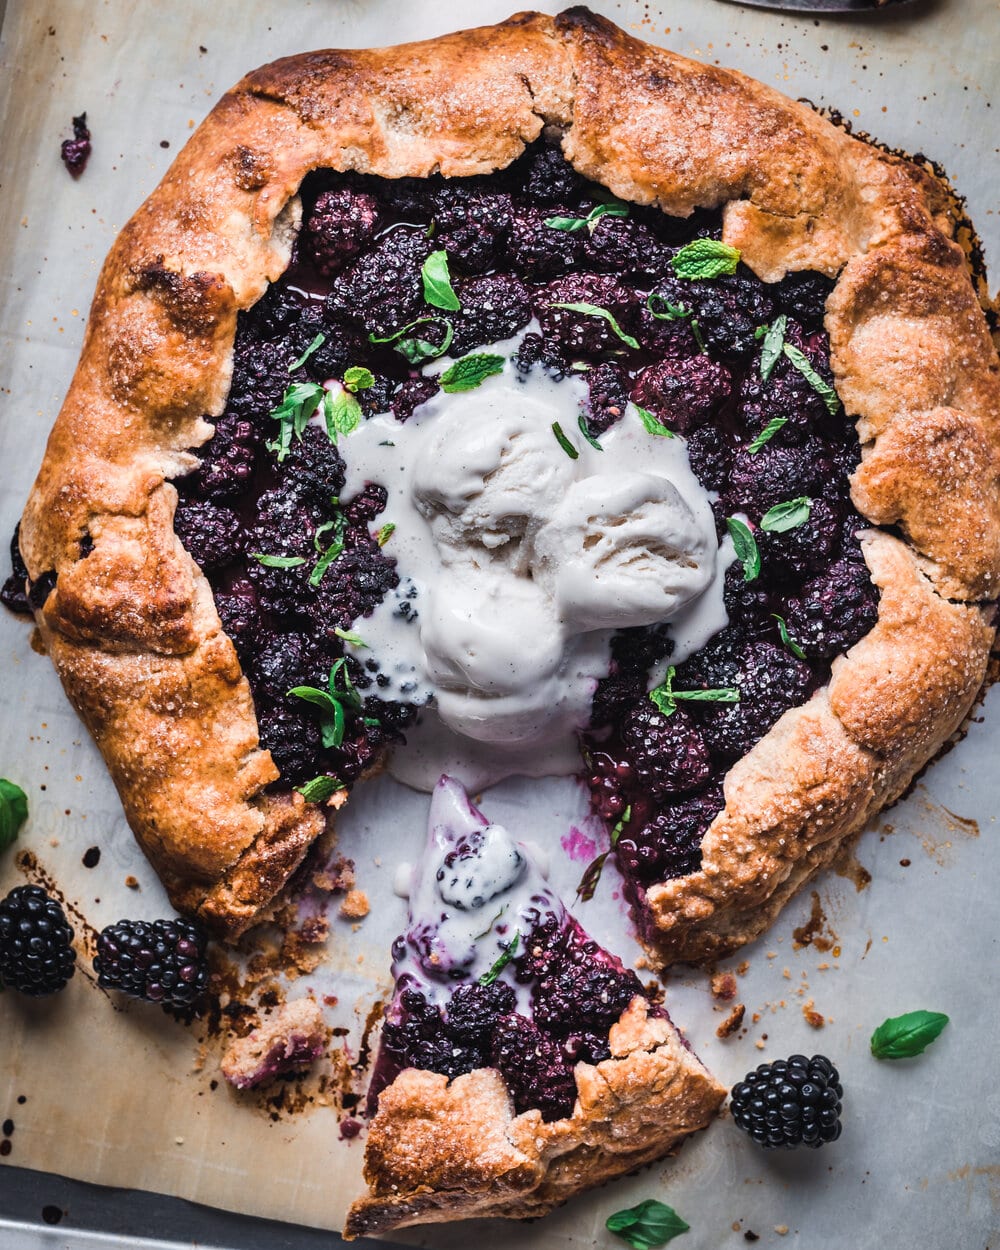 One slice cut from blackberry galette with herbs and ice cream.